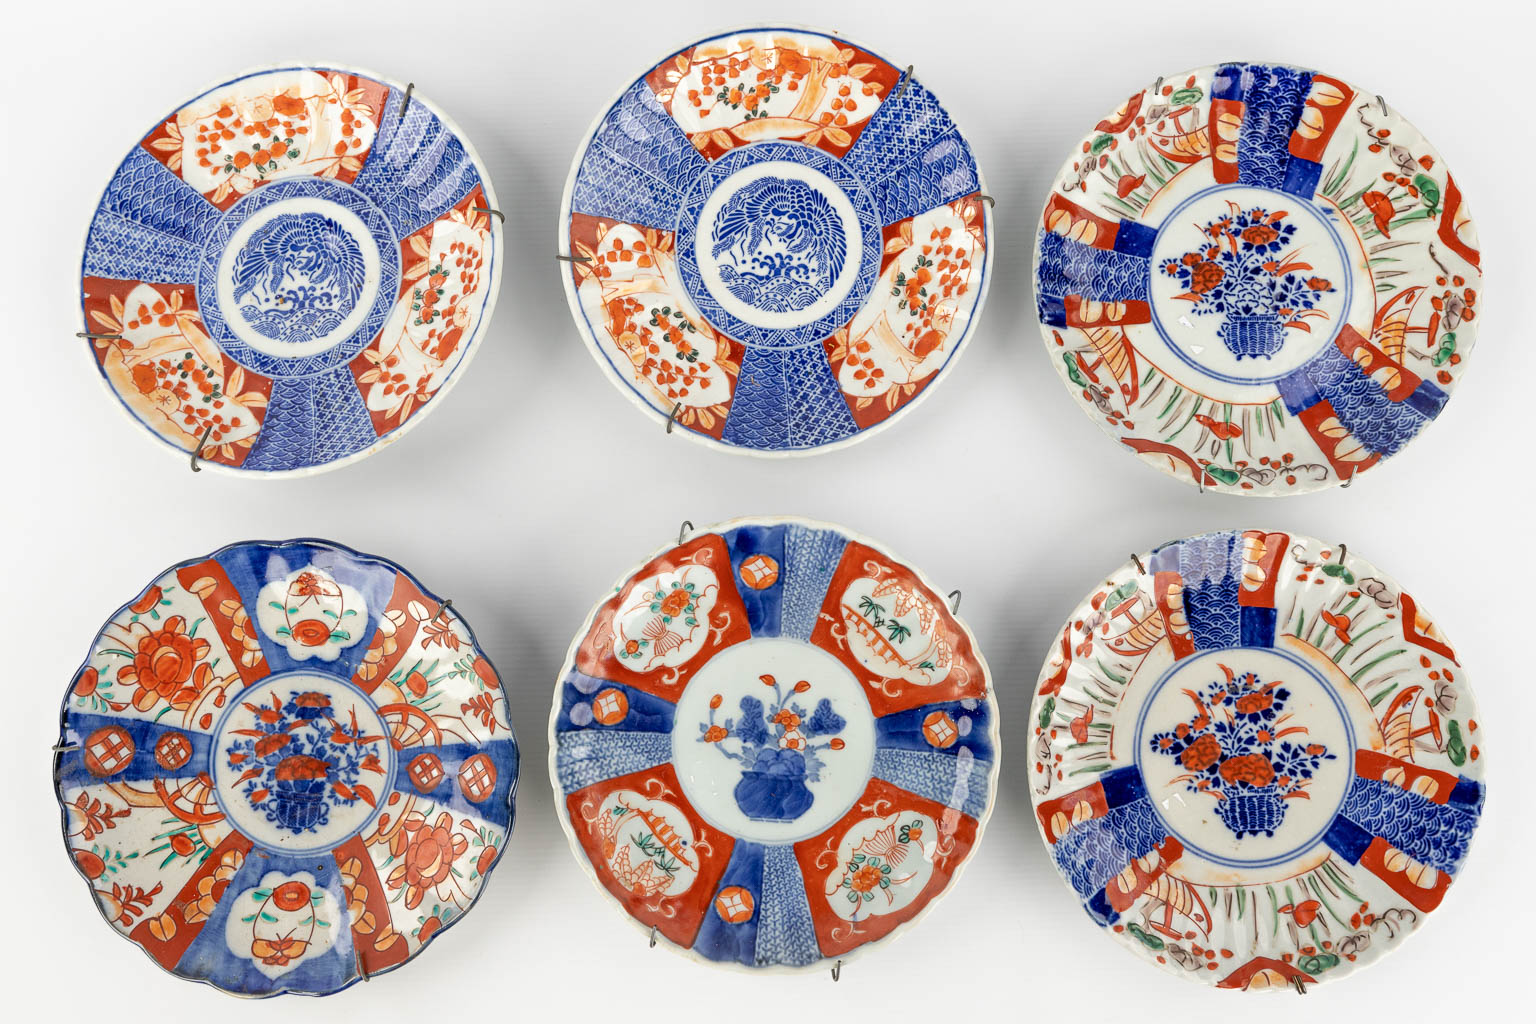 An assembled collection of Japanese Imari and Kutani porcelain. 19th/20th century. (H: 35 x D: 19 cm)